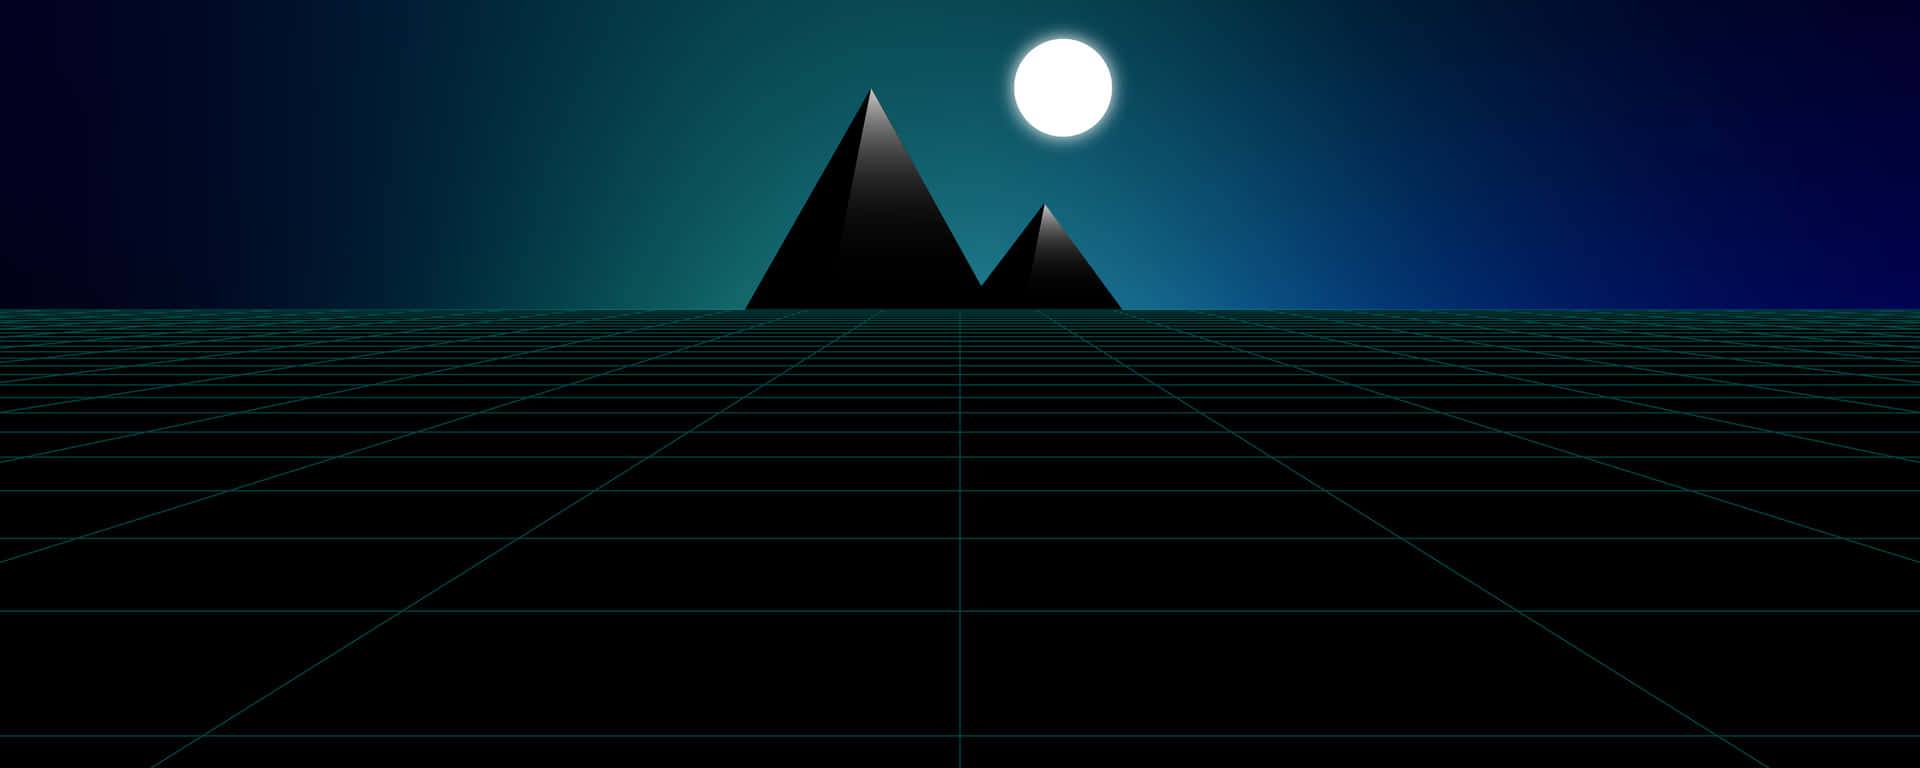 Pyramid Of The Moon Landscape Picture